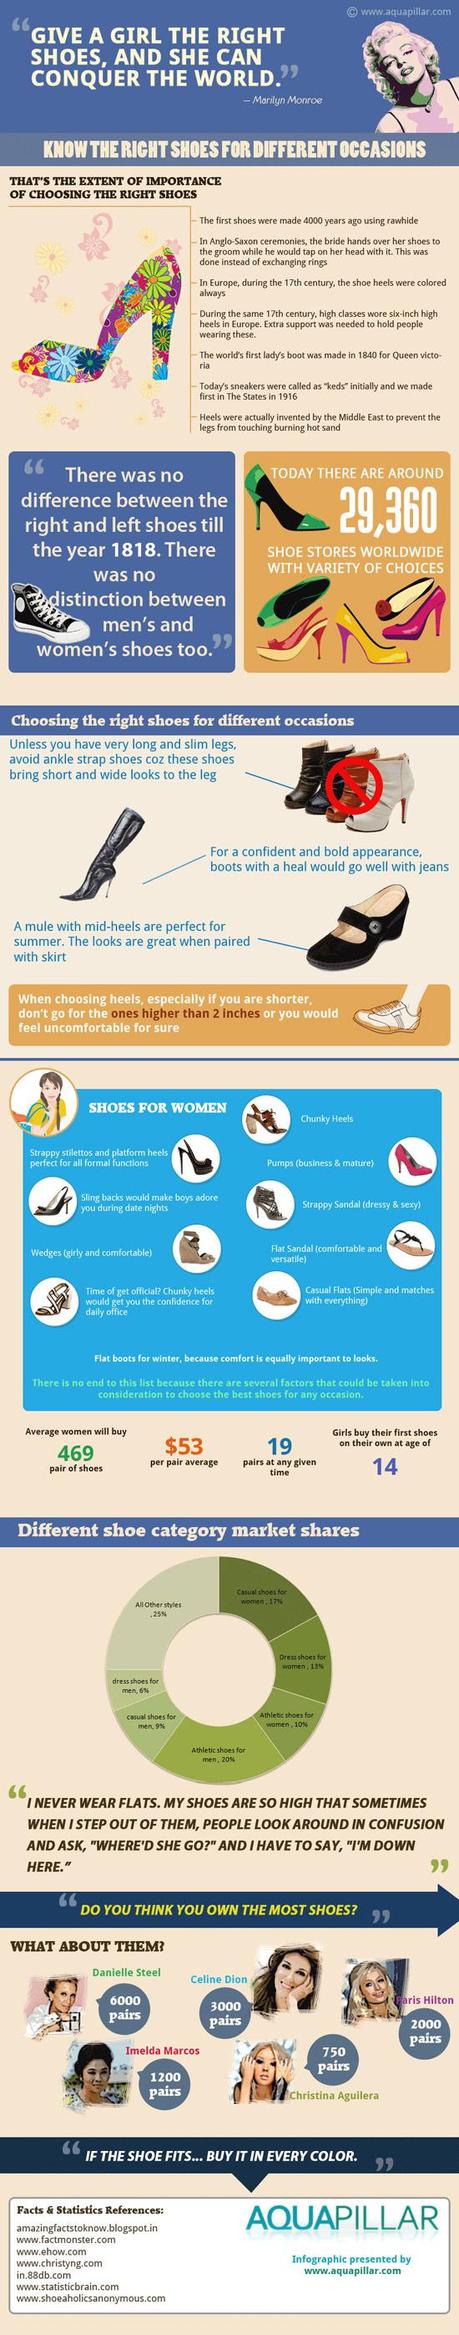 Infographic on Women's Shoes